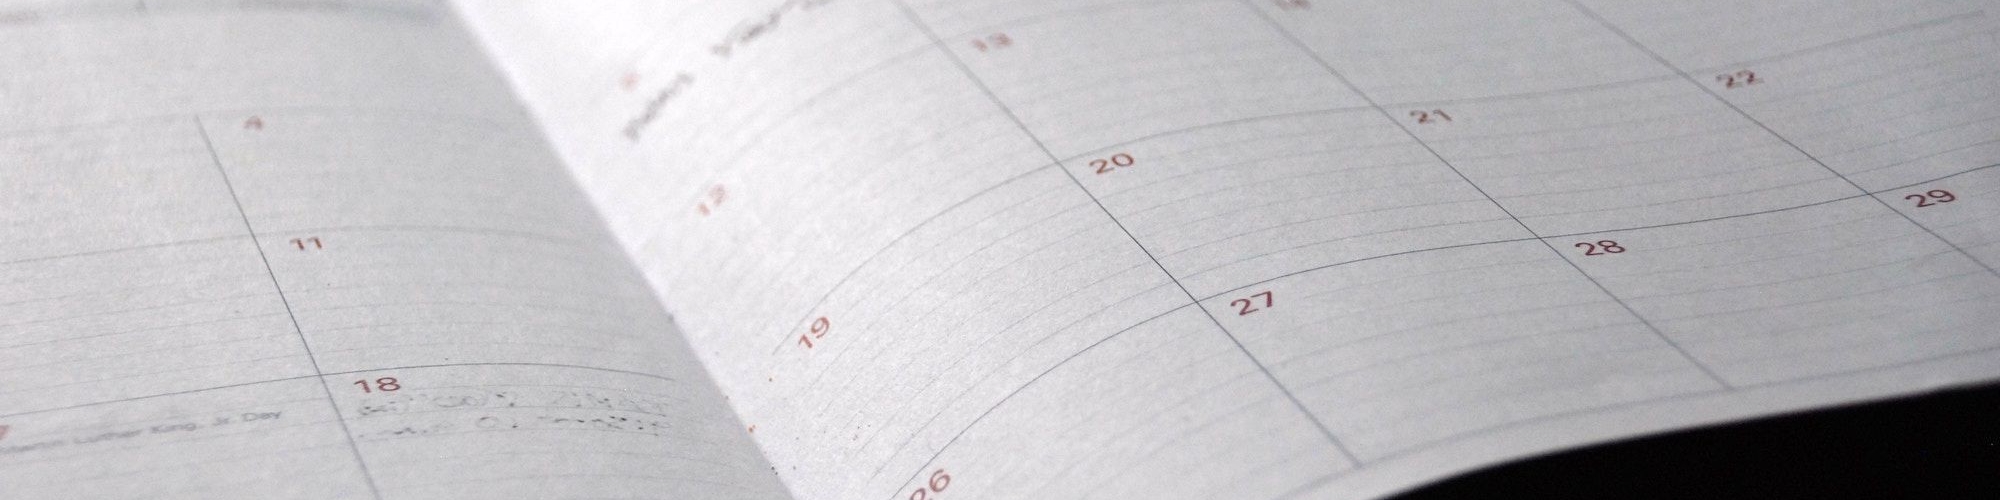 Why You Should Plan Your Day by Priorities — Not Time